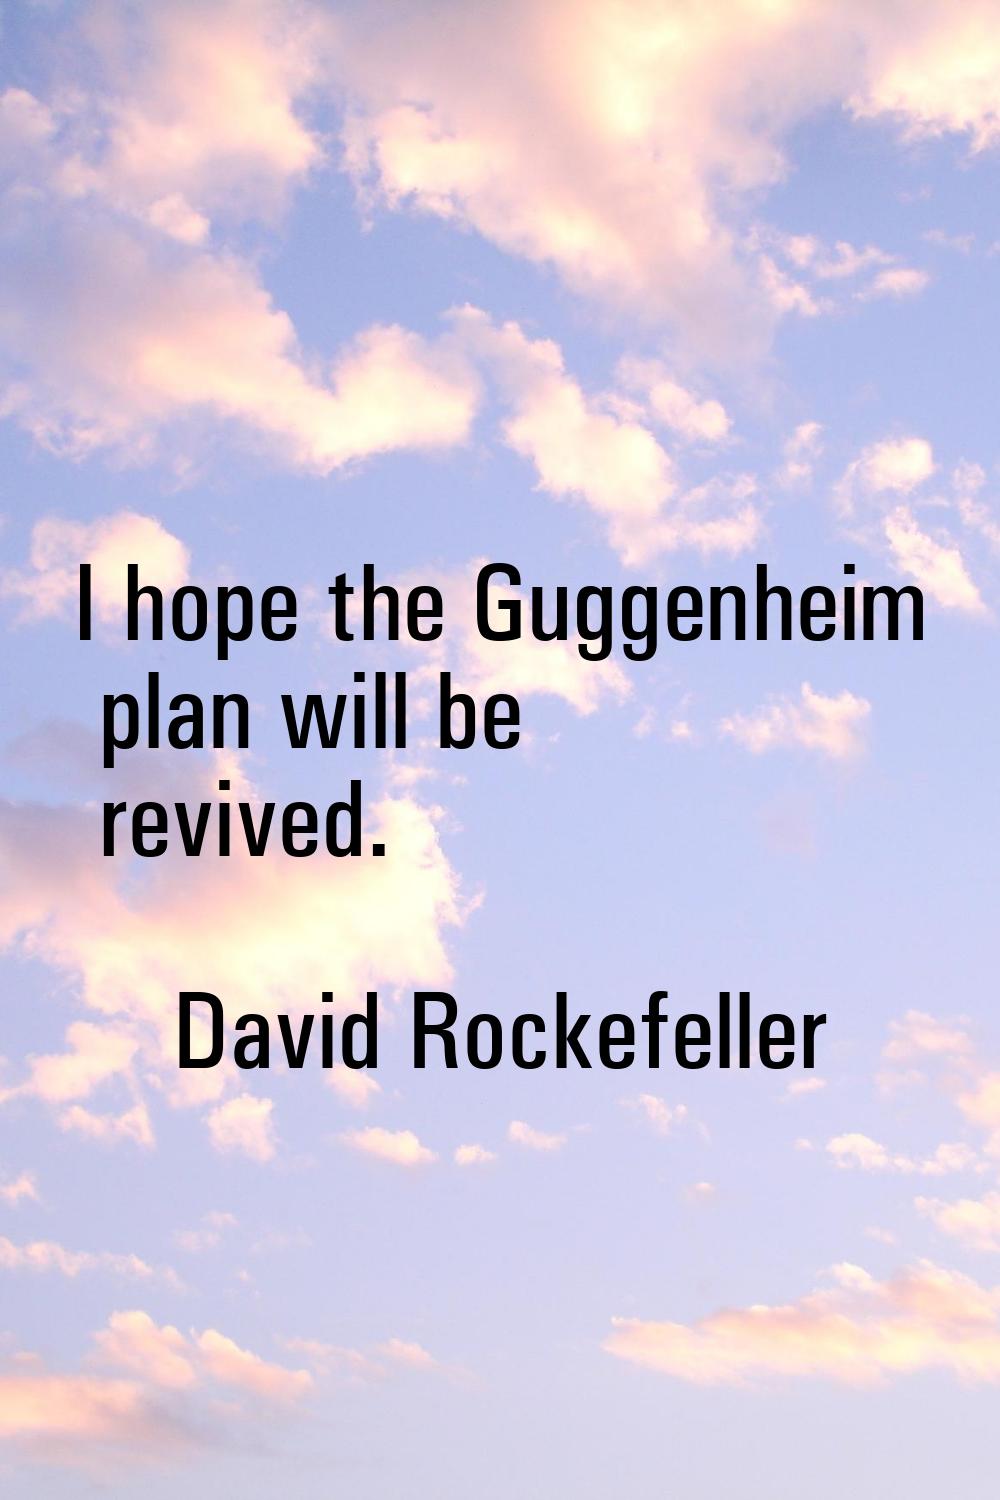 I hope the Guggenheim plan will be revived.